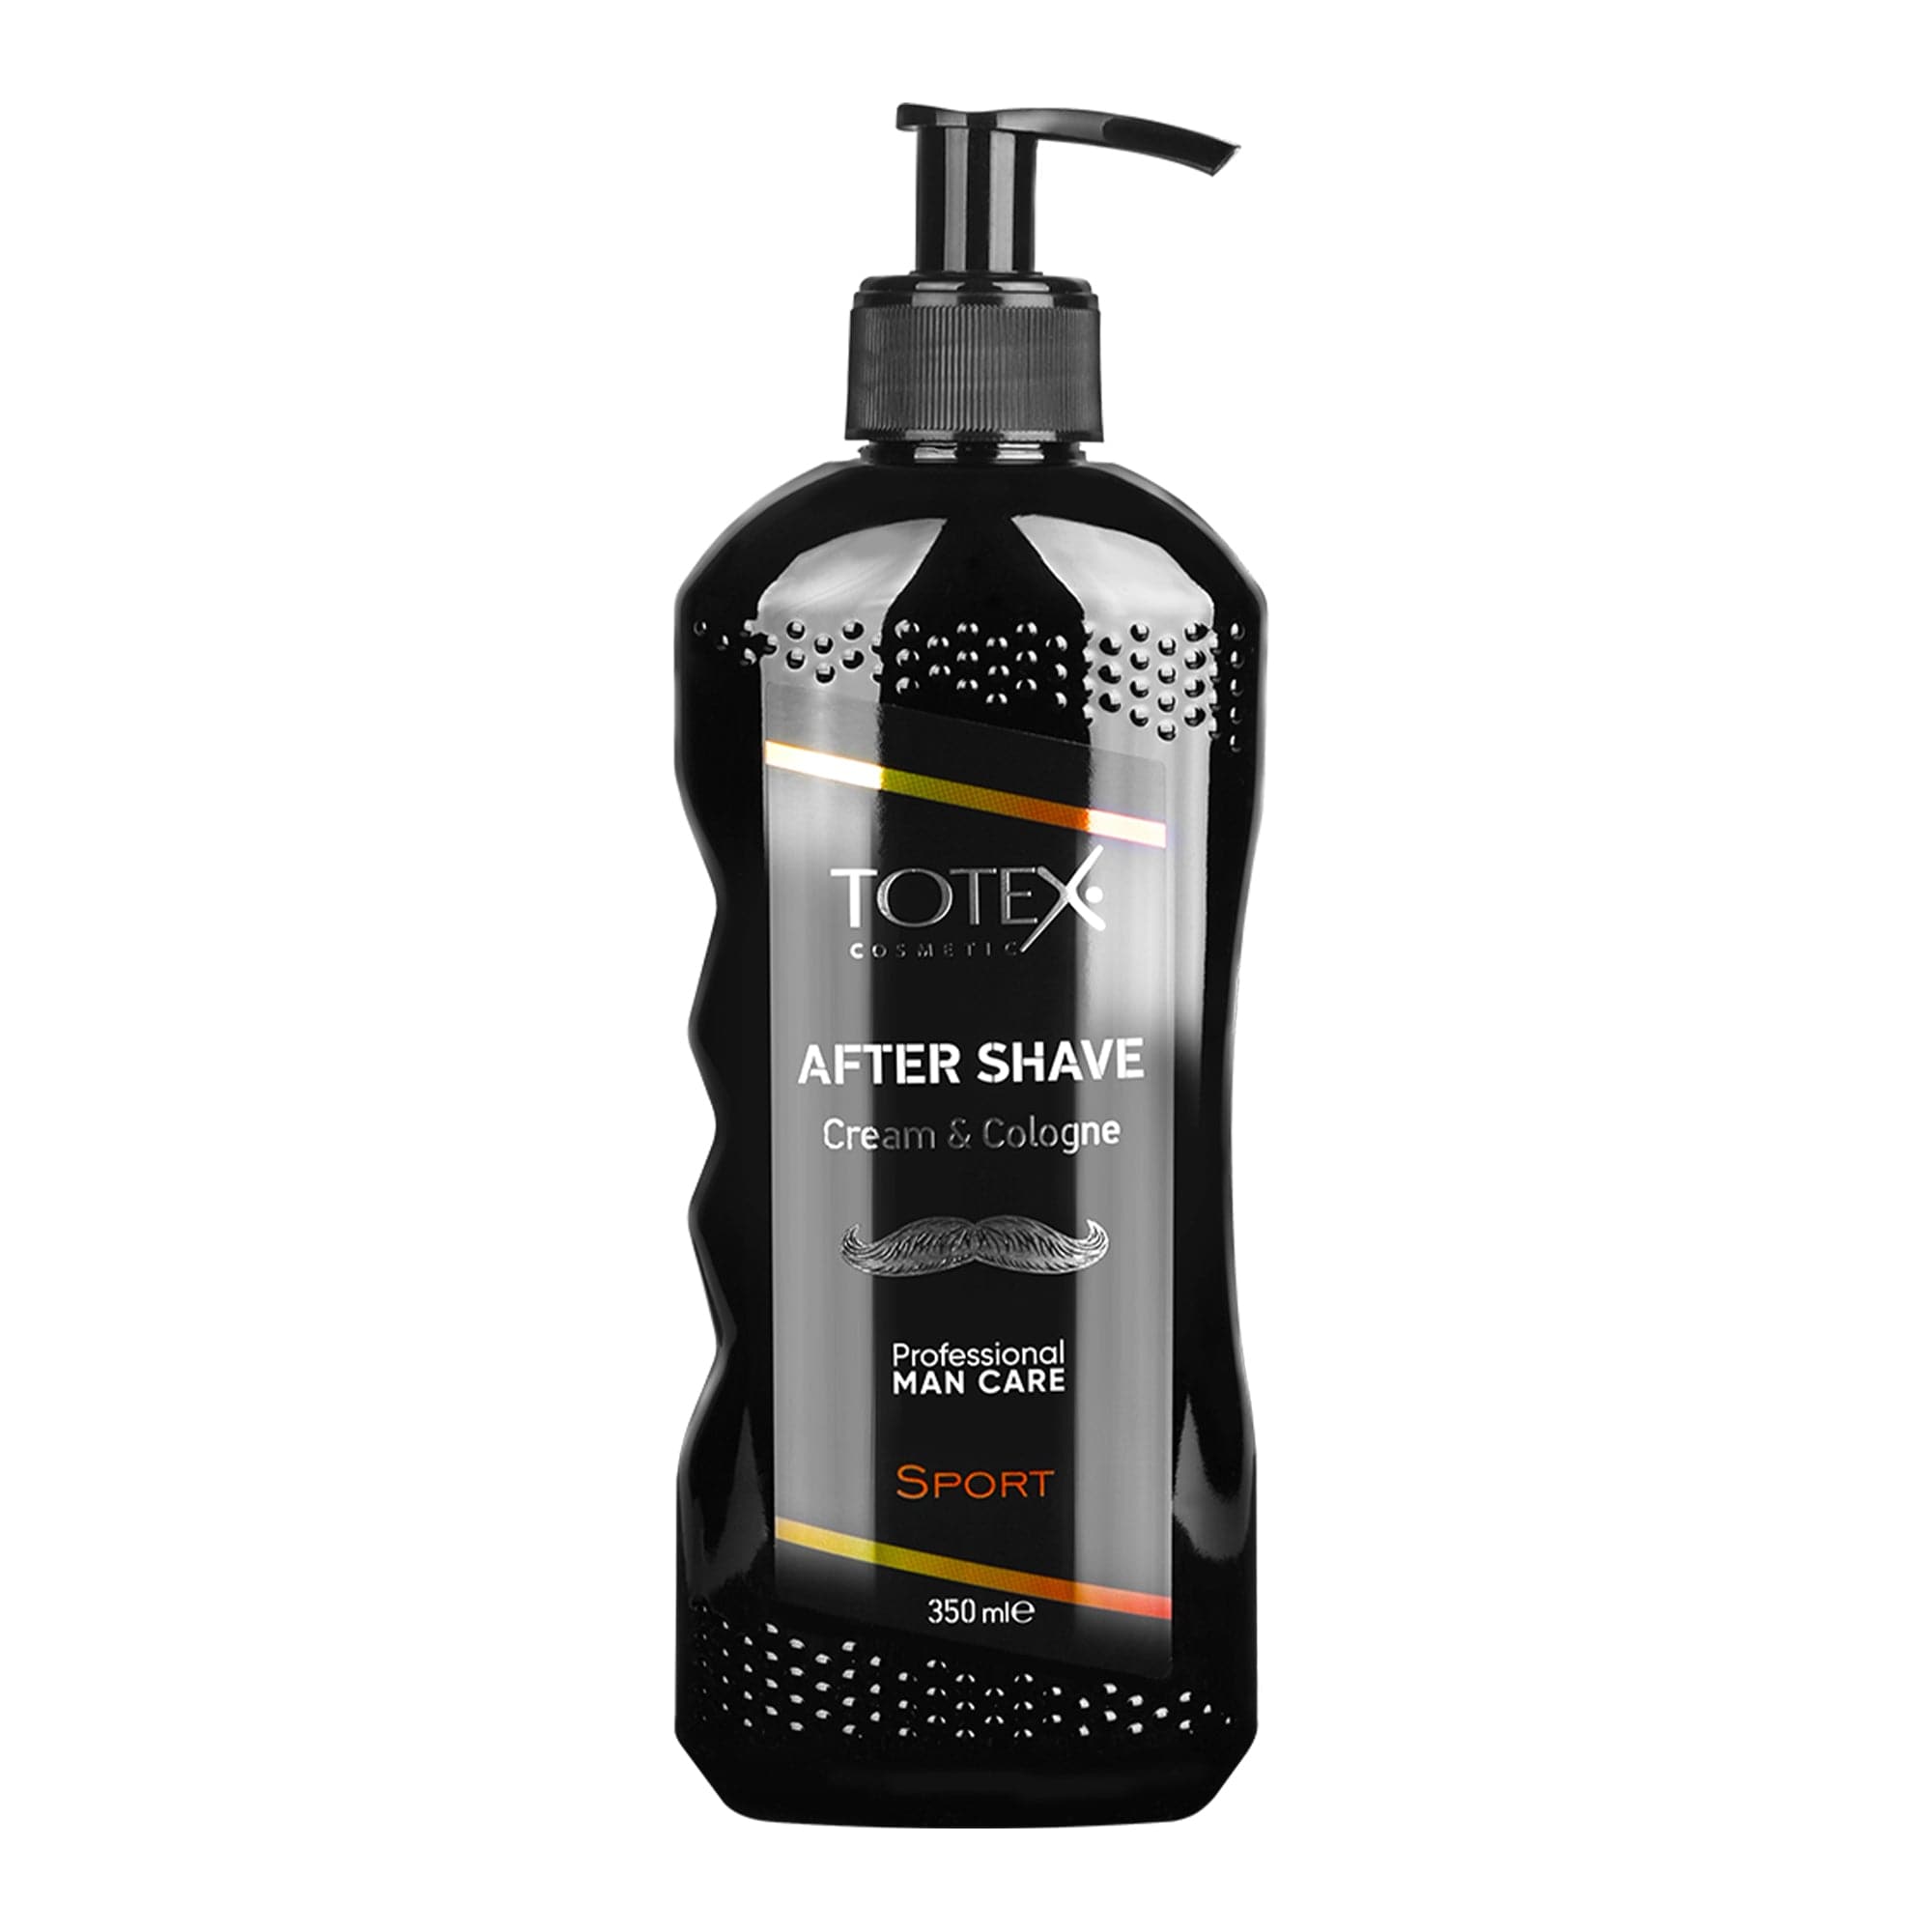 Totex - After Shave Cream & Cologne Sport 350ml